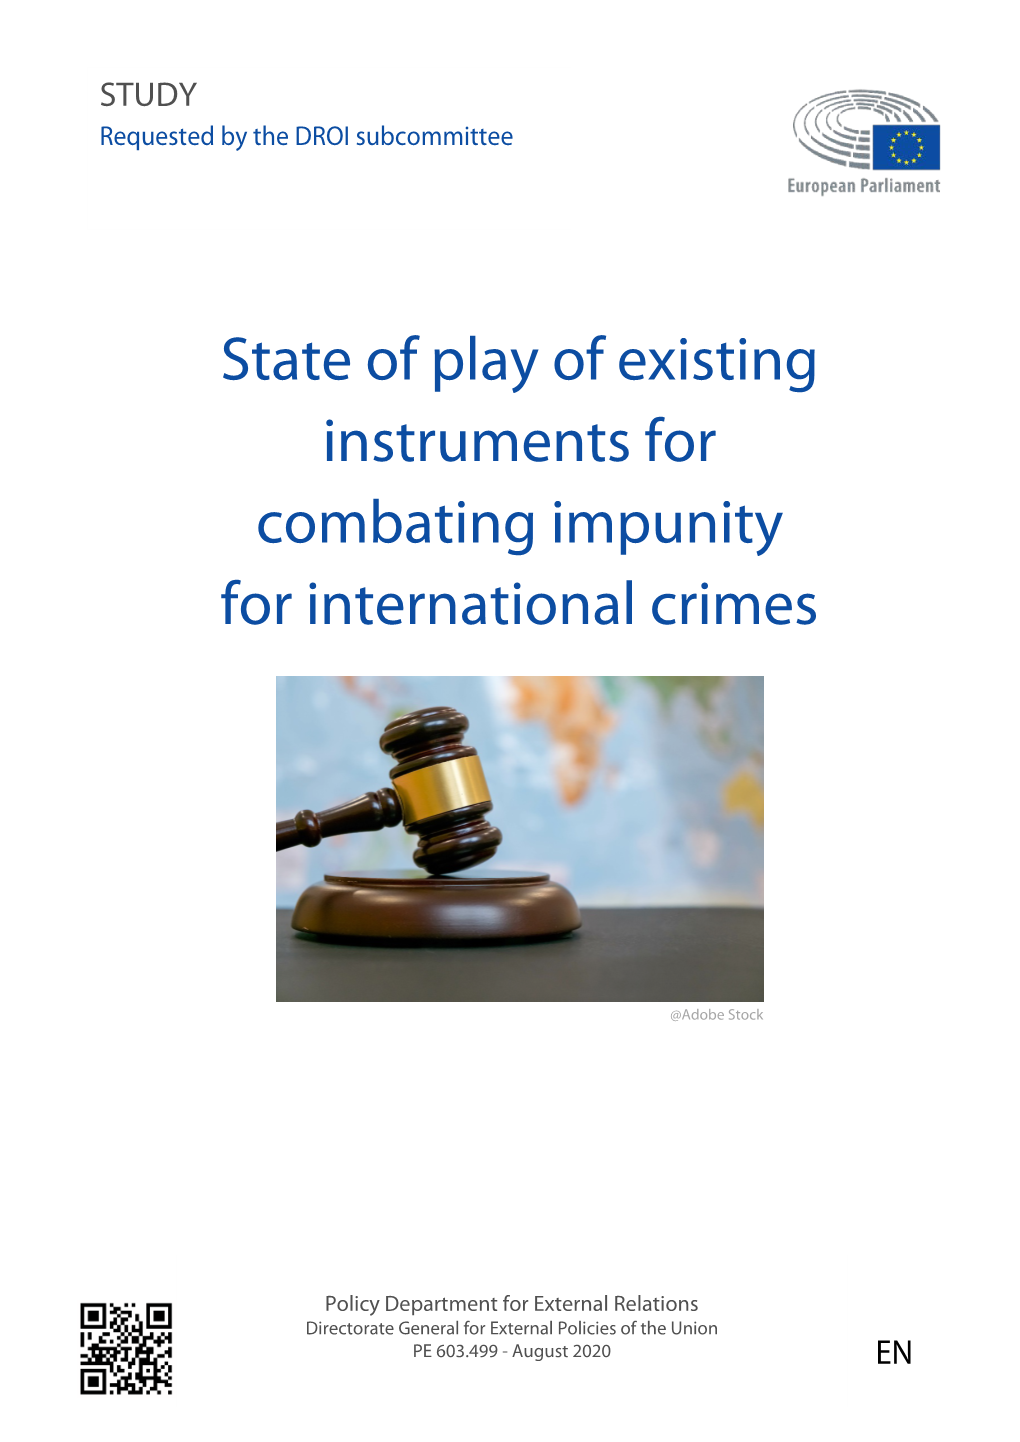 State of Play of Existing Instruments for Combating Impunity for International Crimes